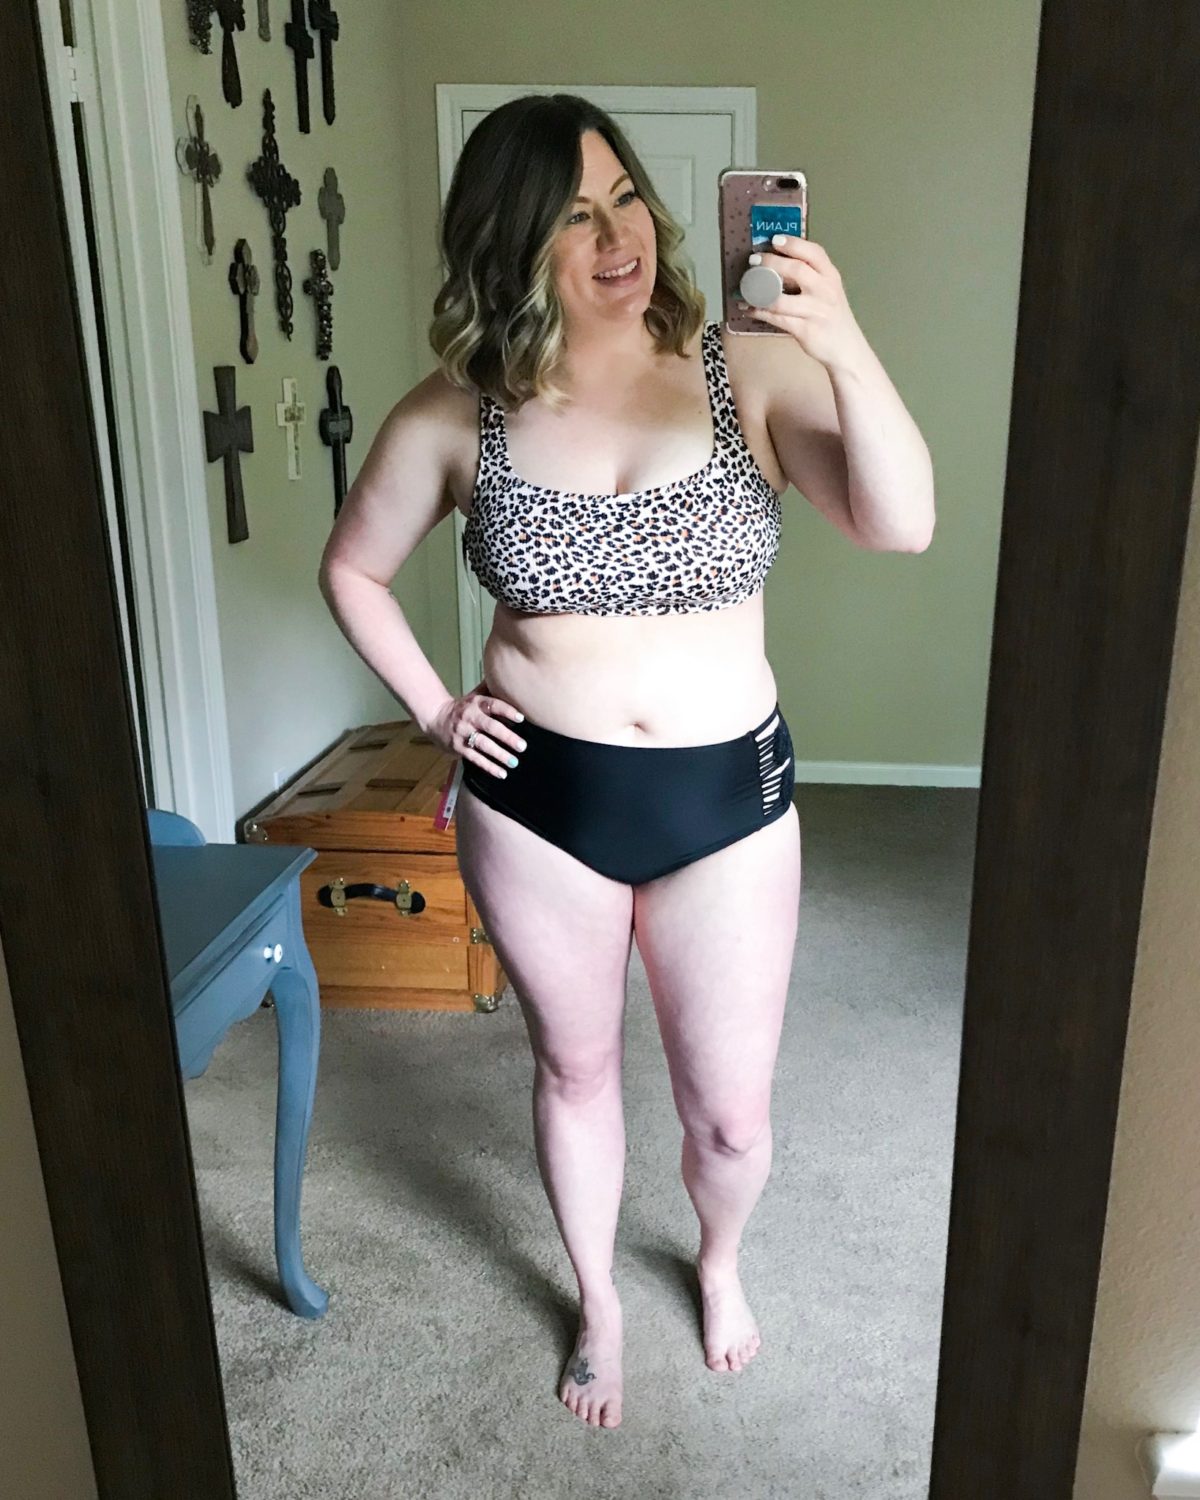 Review of Target Swimsuits: Ageless, Sizeless and Affordable